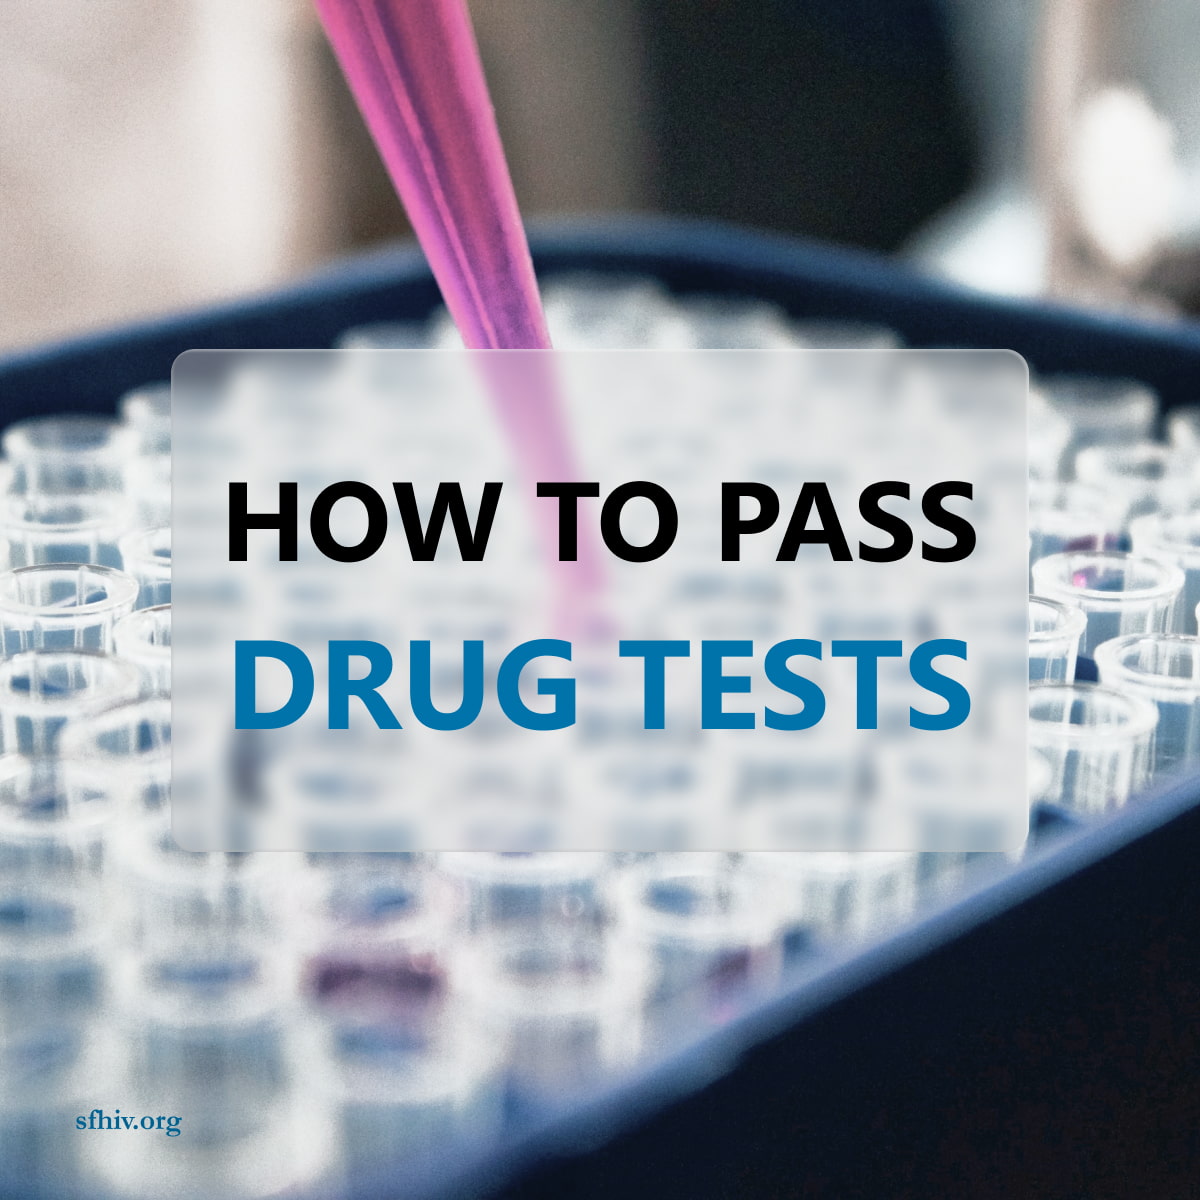 How To Pass Drug Tests